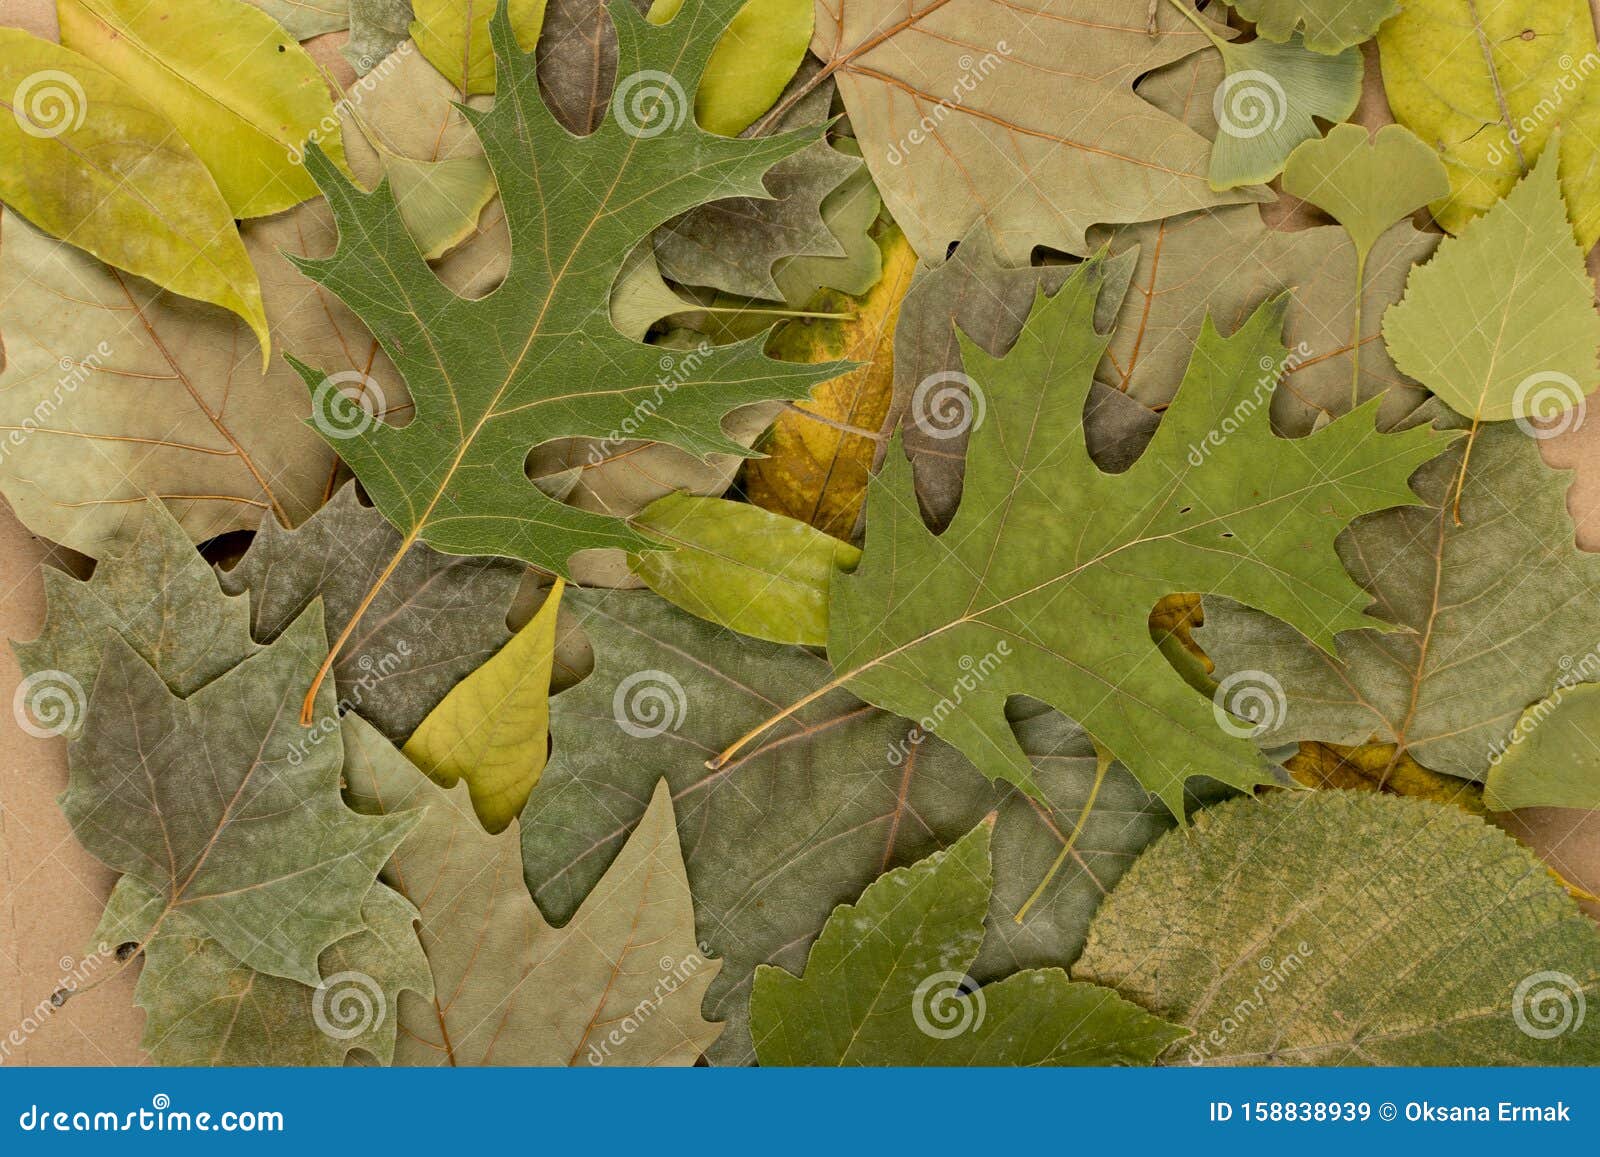 Flat Dried Leaves Or Forest Floor In Camouflage Colors Stock Image